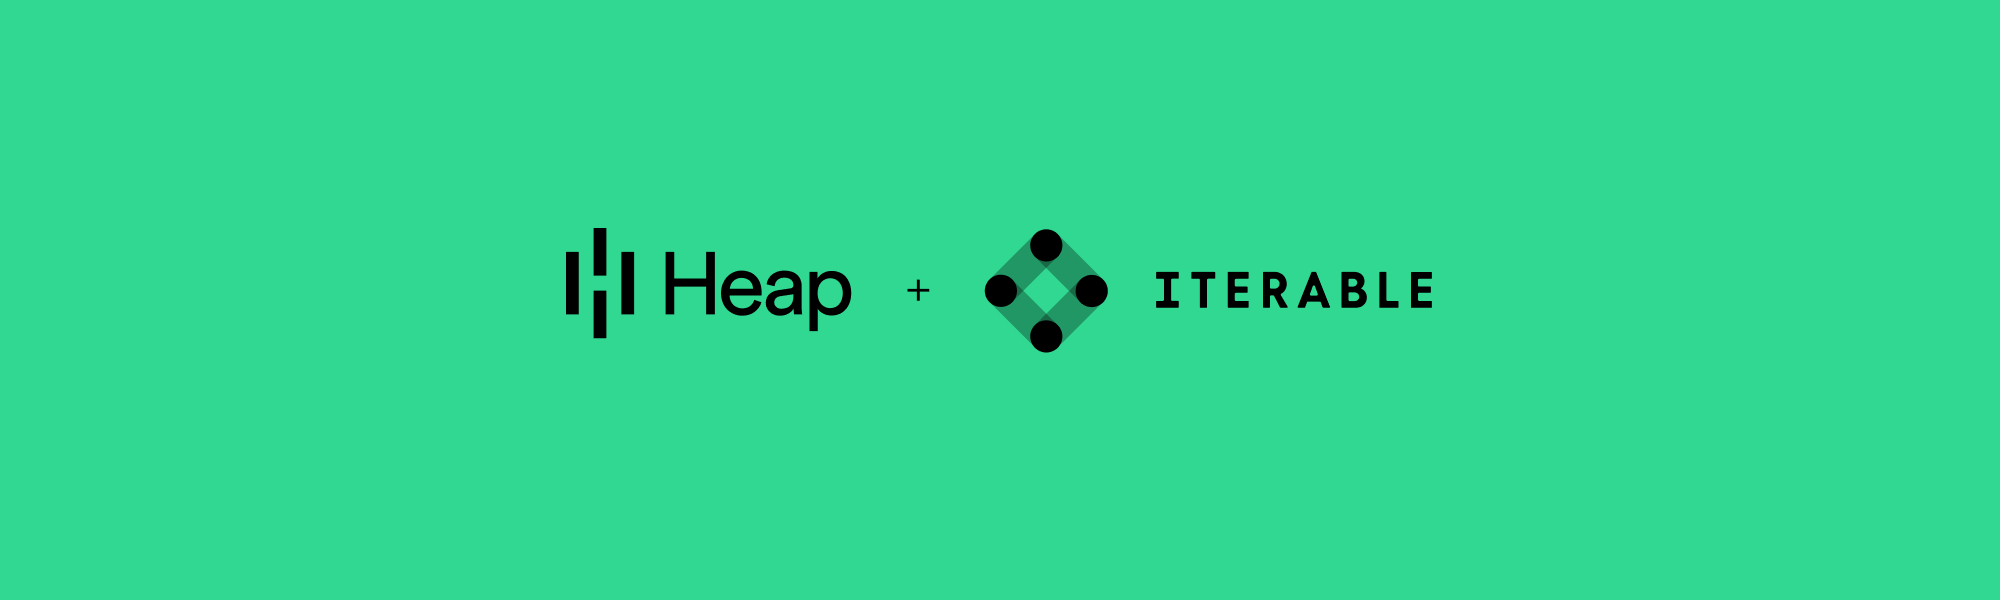 Heap partners with Iterable